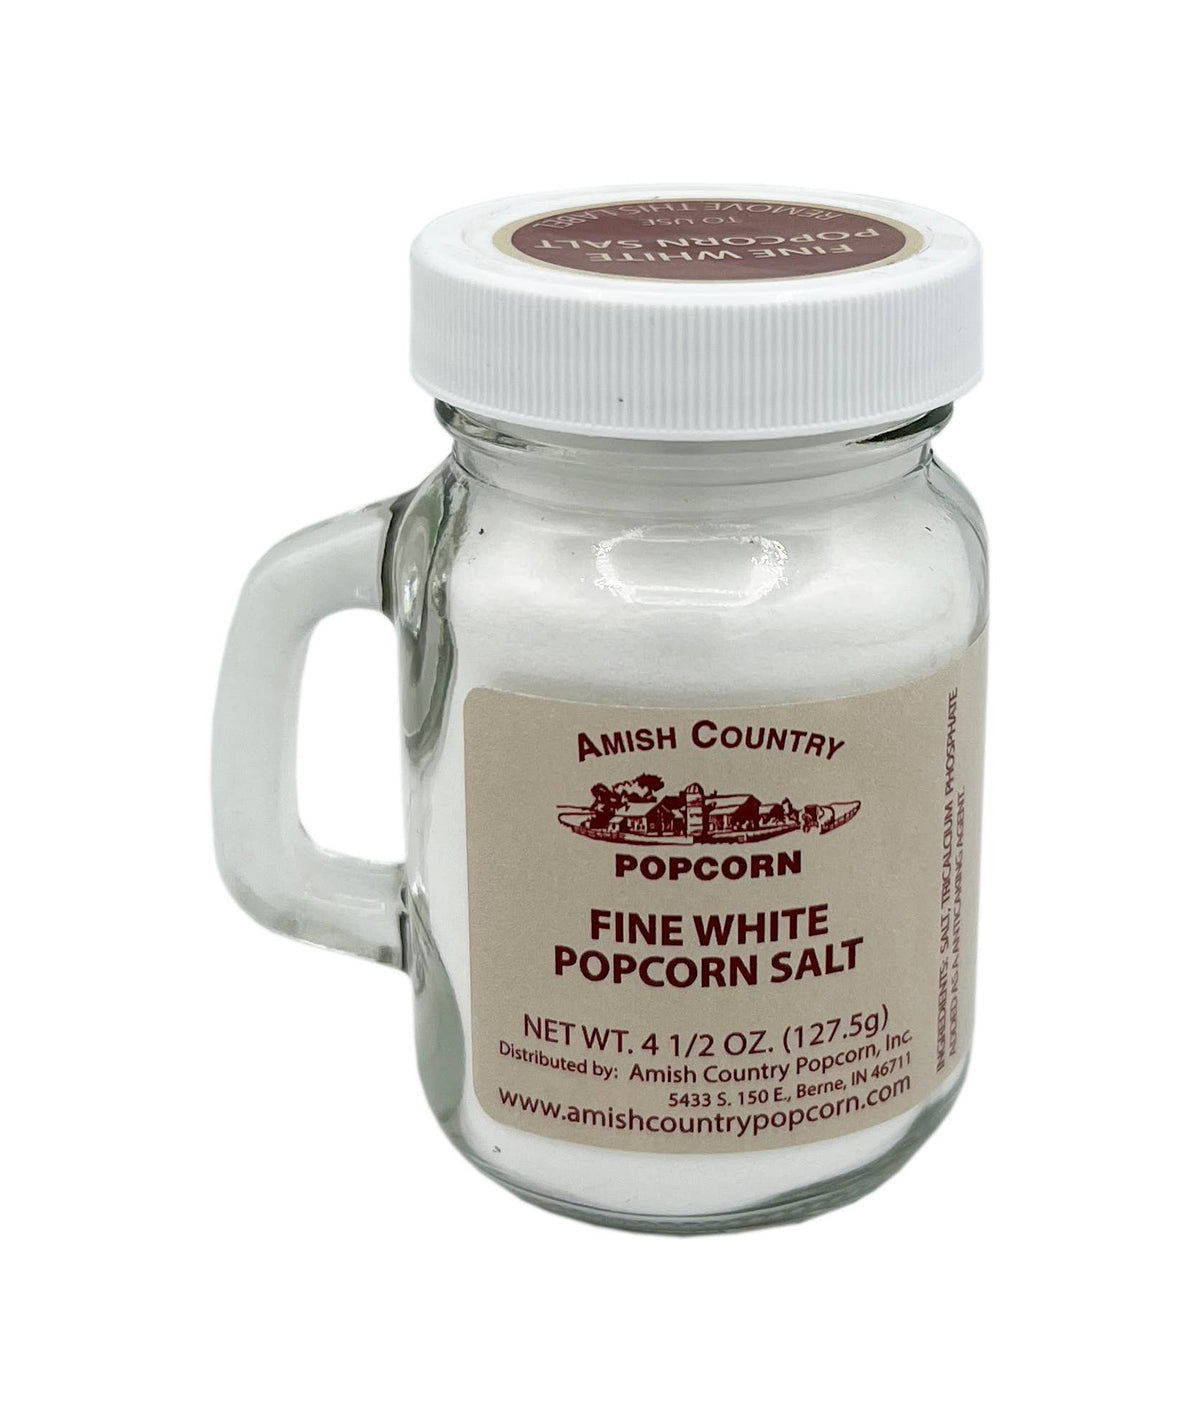 Amish Country Popcorn - 4.5 oz. Bottle of Fine White Popcorn Salt - Pacific Flyway Supplies